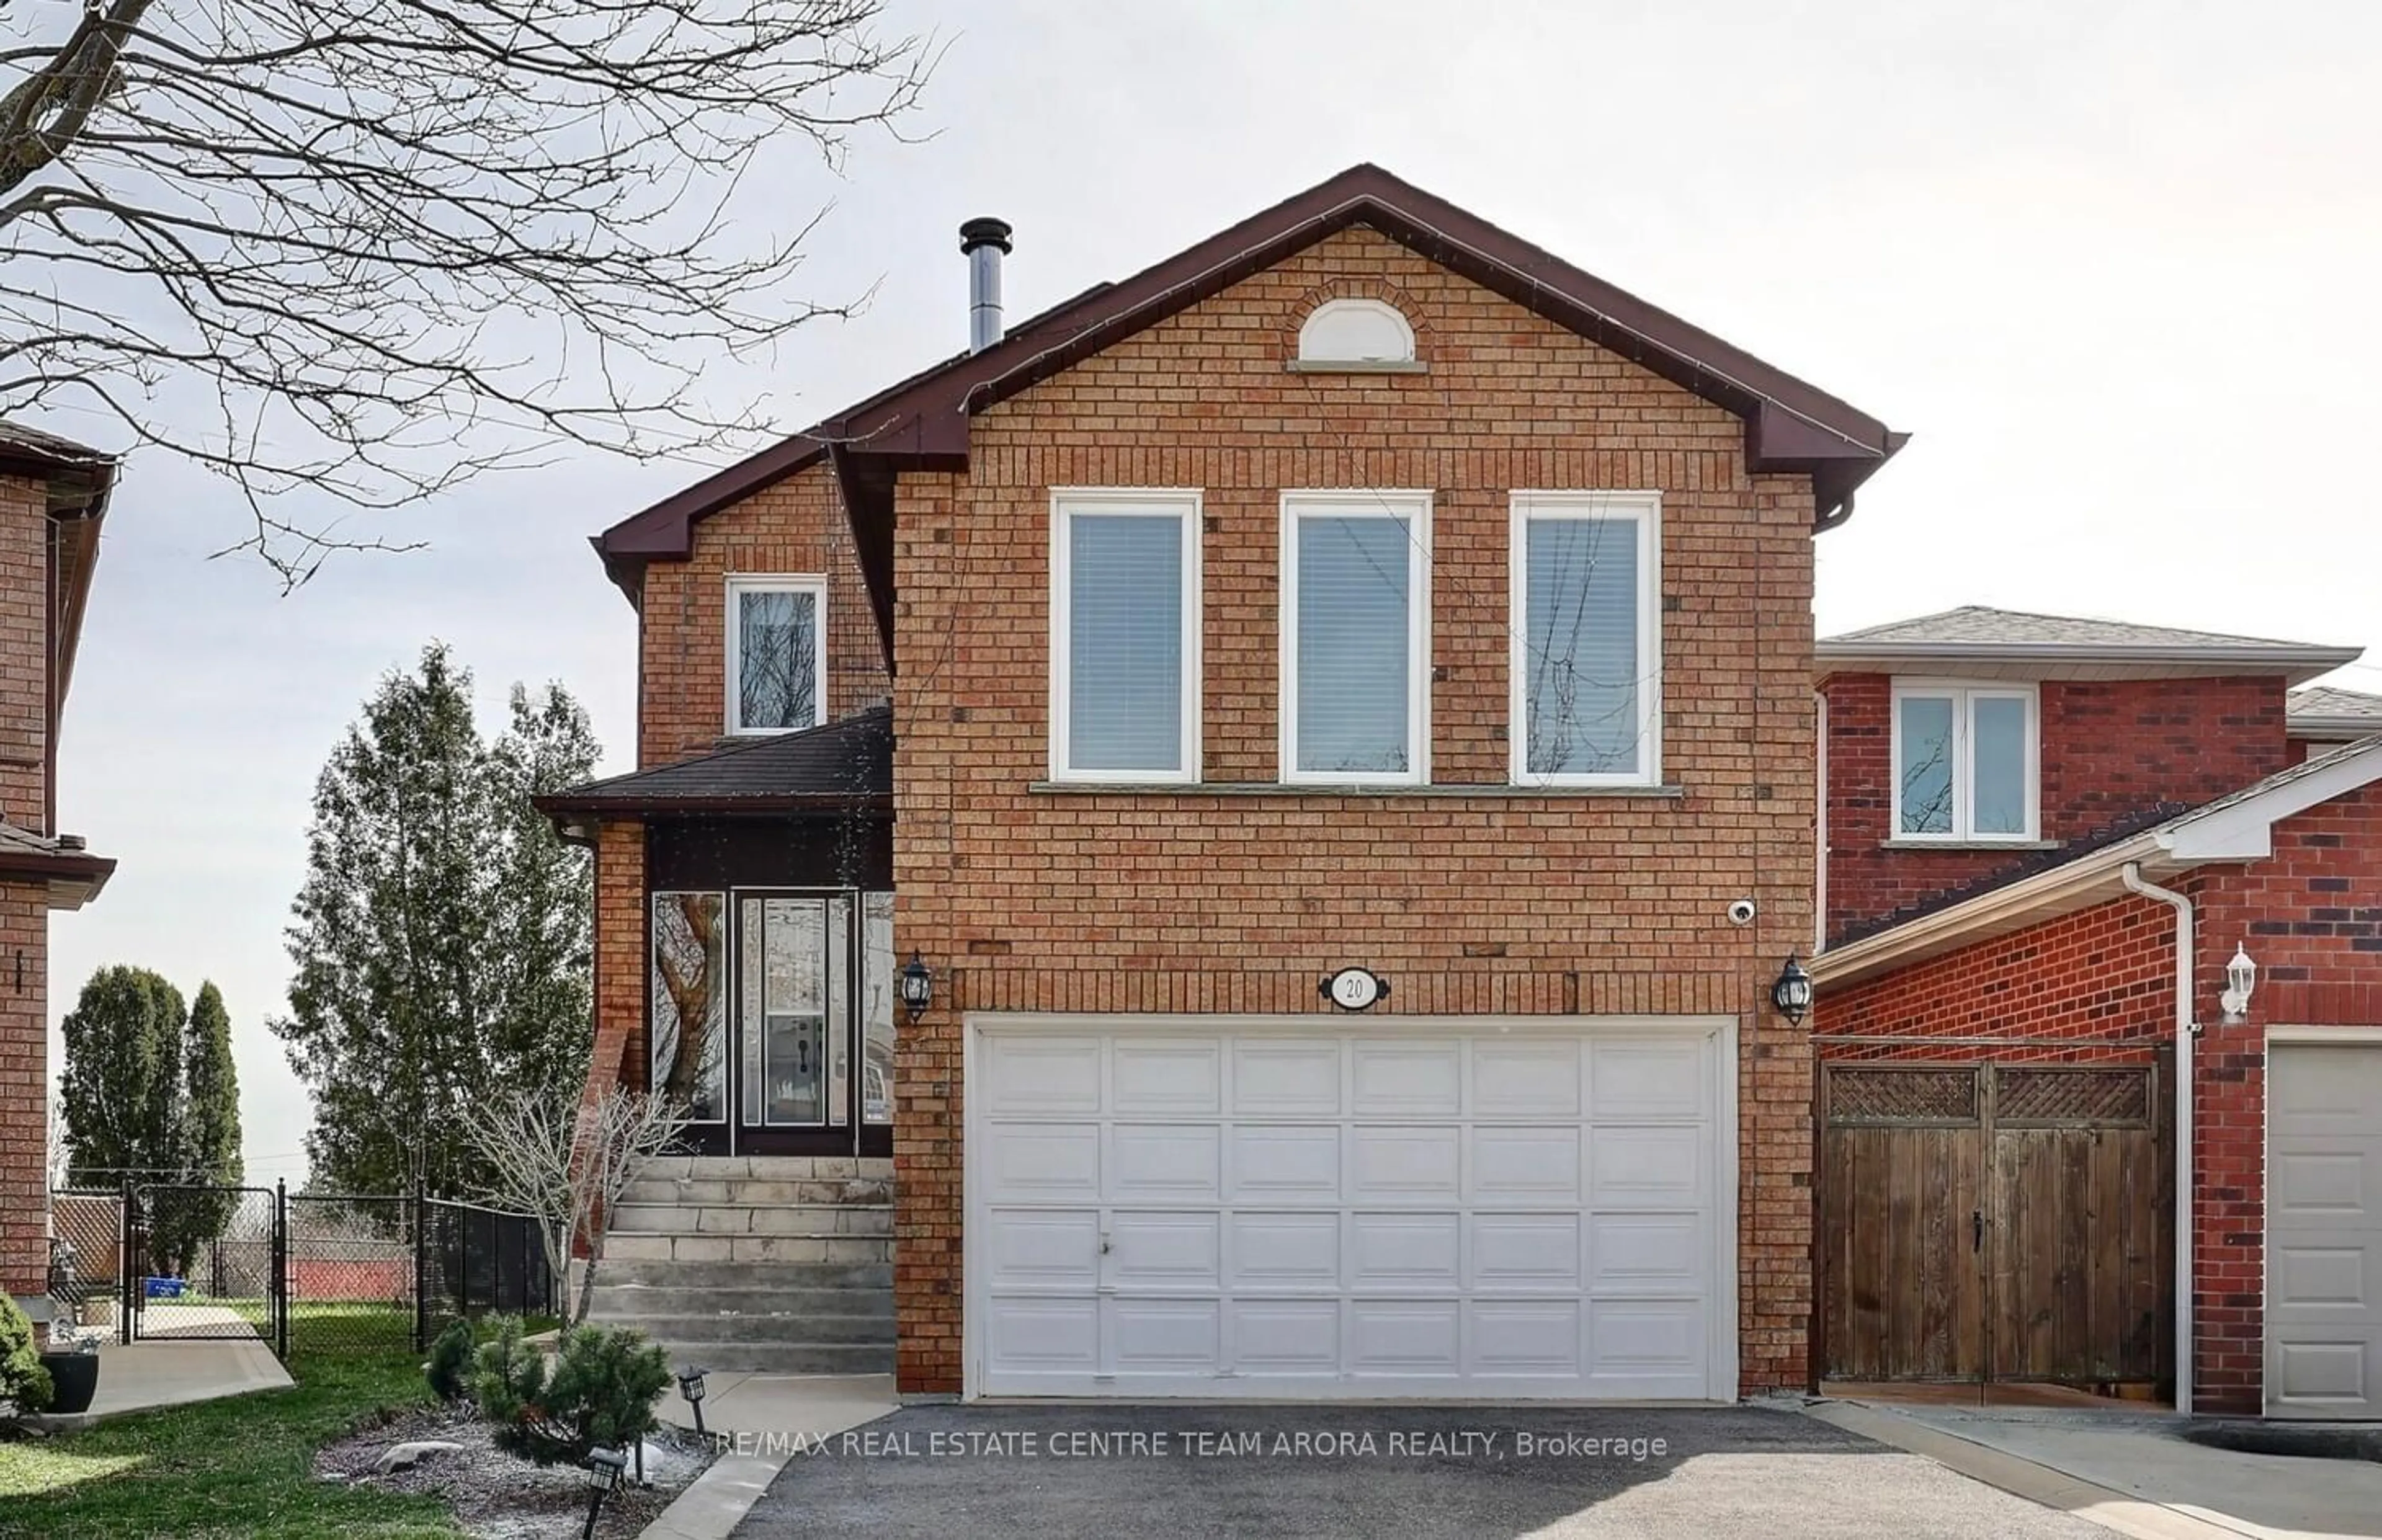 Home with brick exterior material for 20 Preakness Crt, Brampton Ontario L6Y 4G3